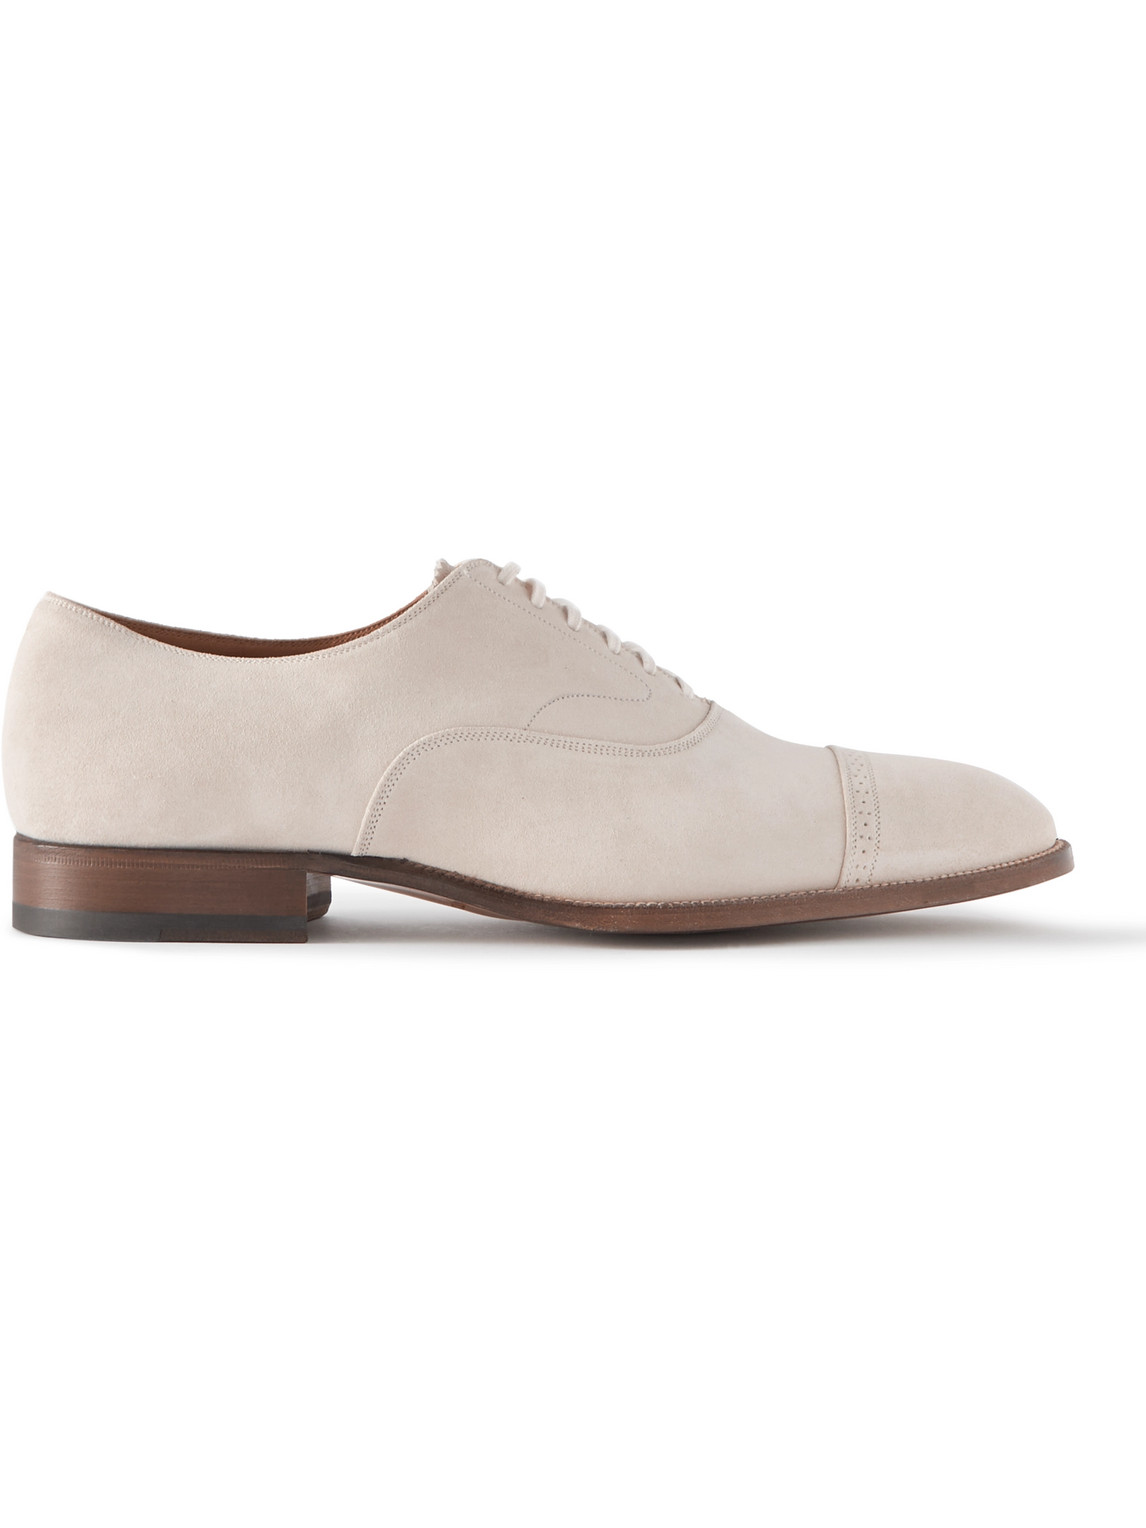 TOM FORD SUEDE OXFORD BROGUES